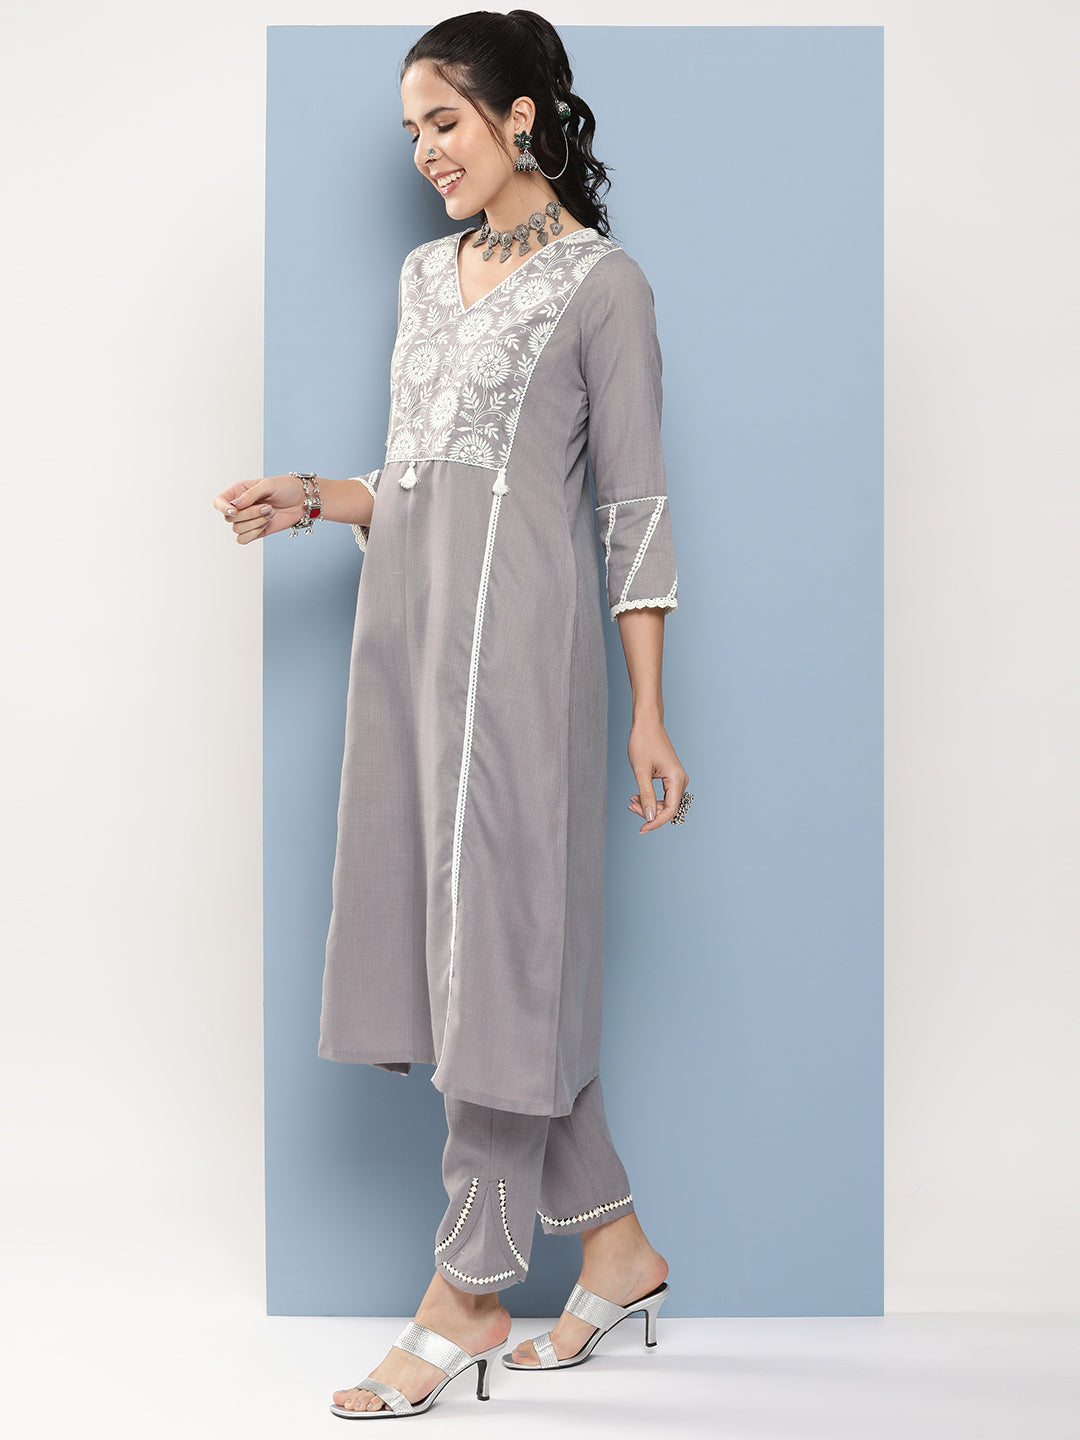 Women's Grey Embroidered A-Line Kurta With Lace Detailing With Grey Solid Palazzos - Bhama Couture